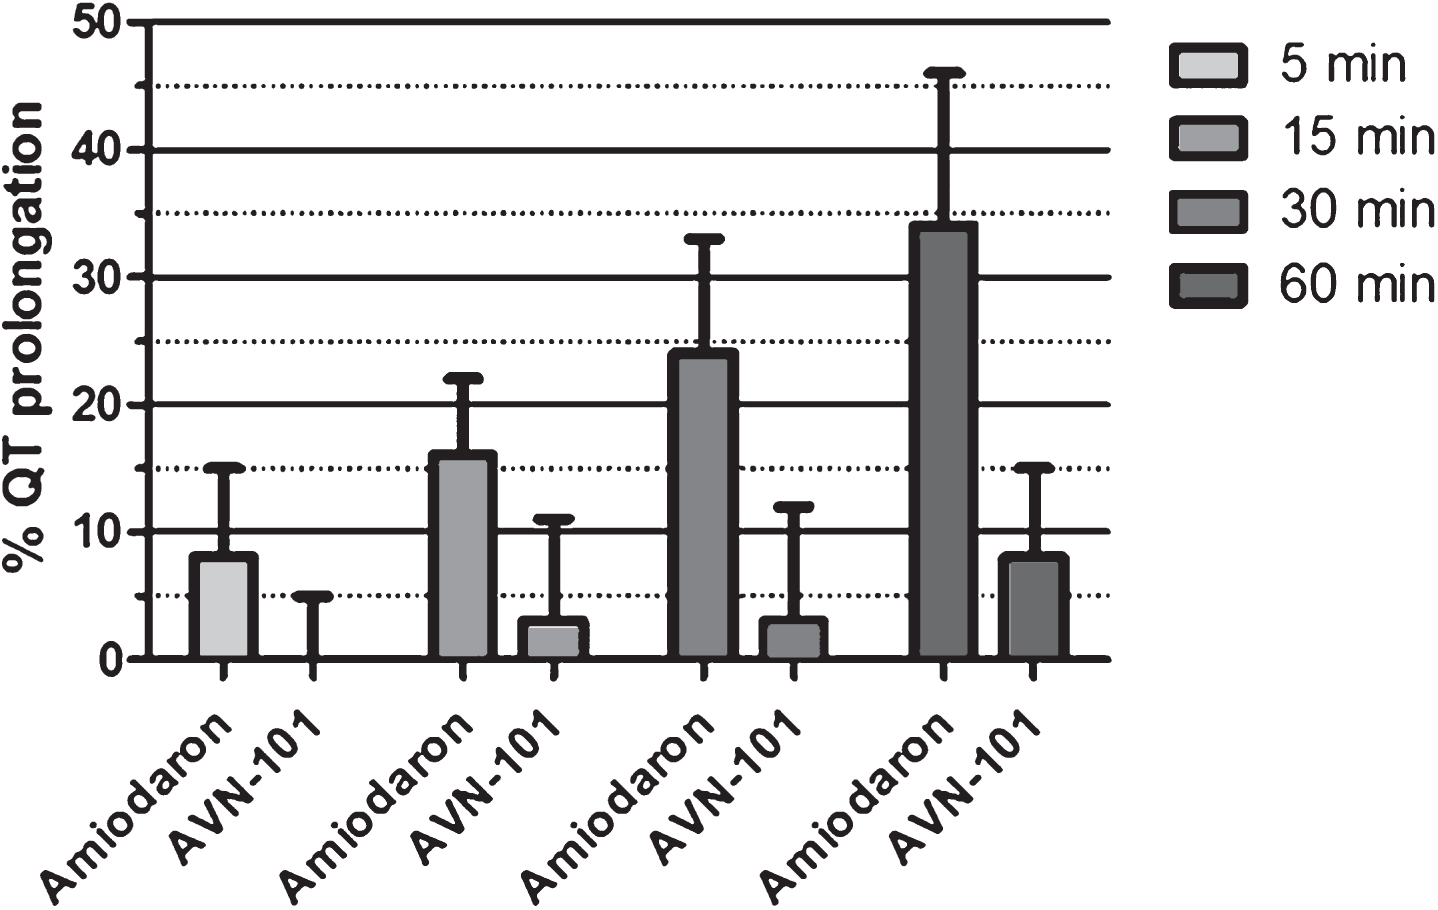 Q-T prolongation in guinea pigs by AVN-101 and positive control amiodaron.